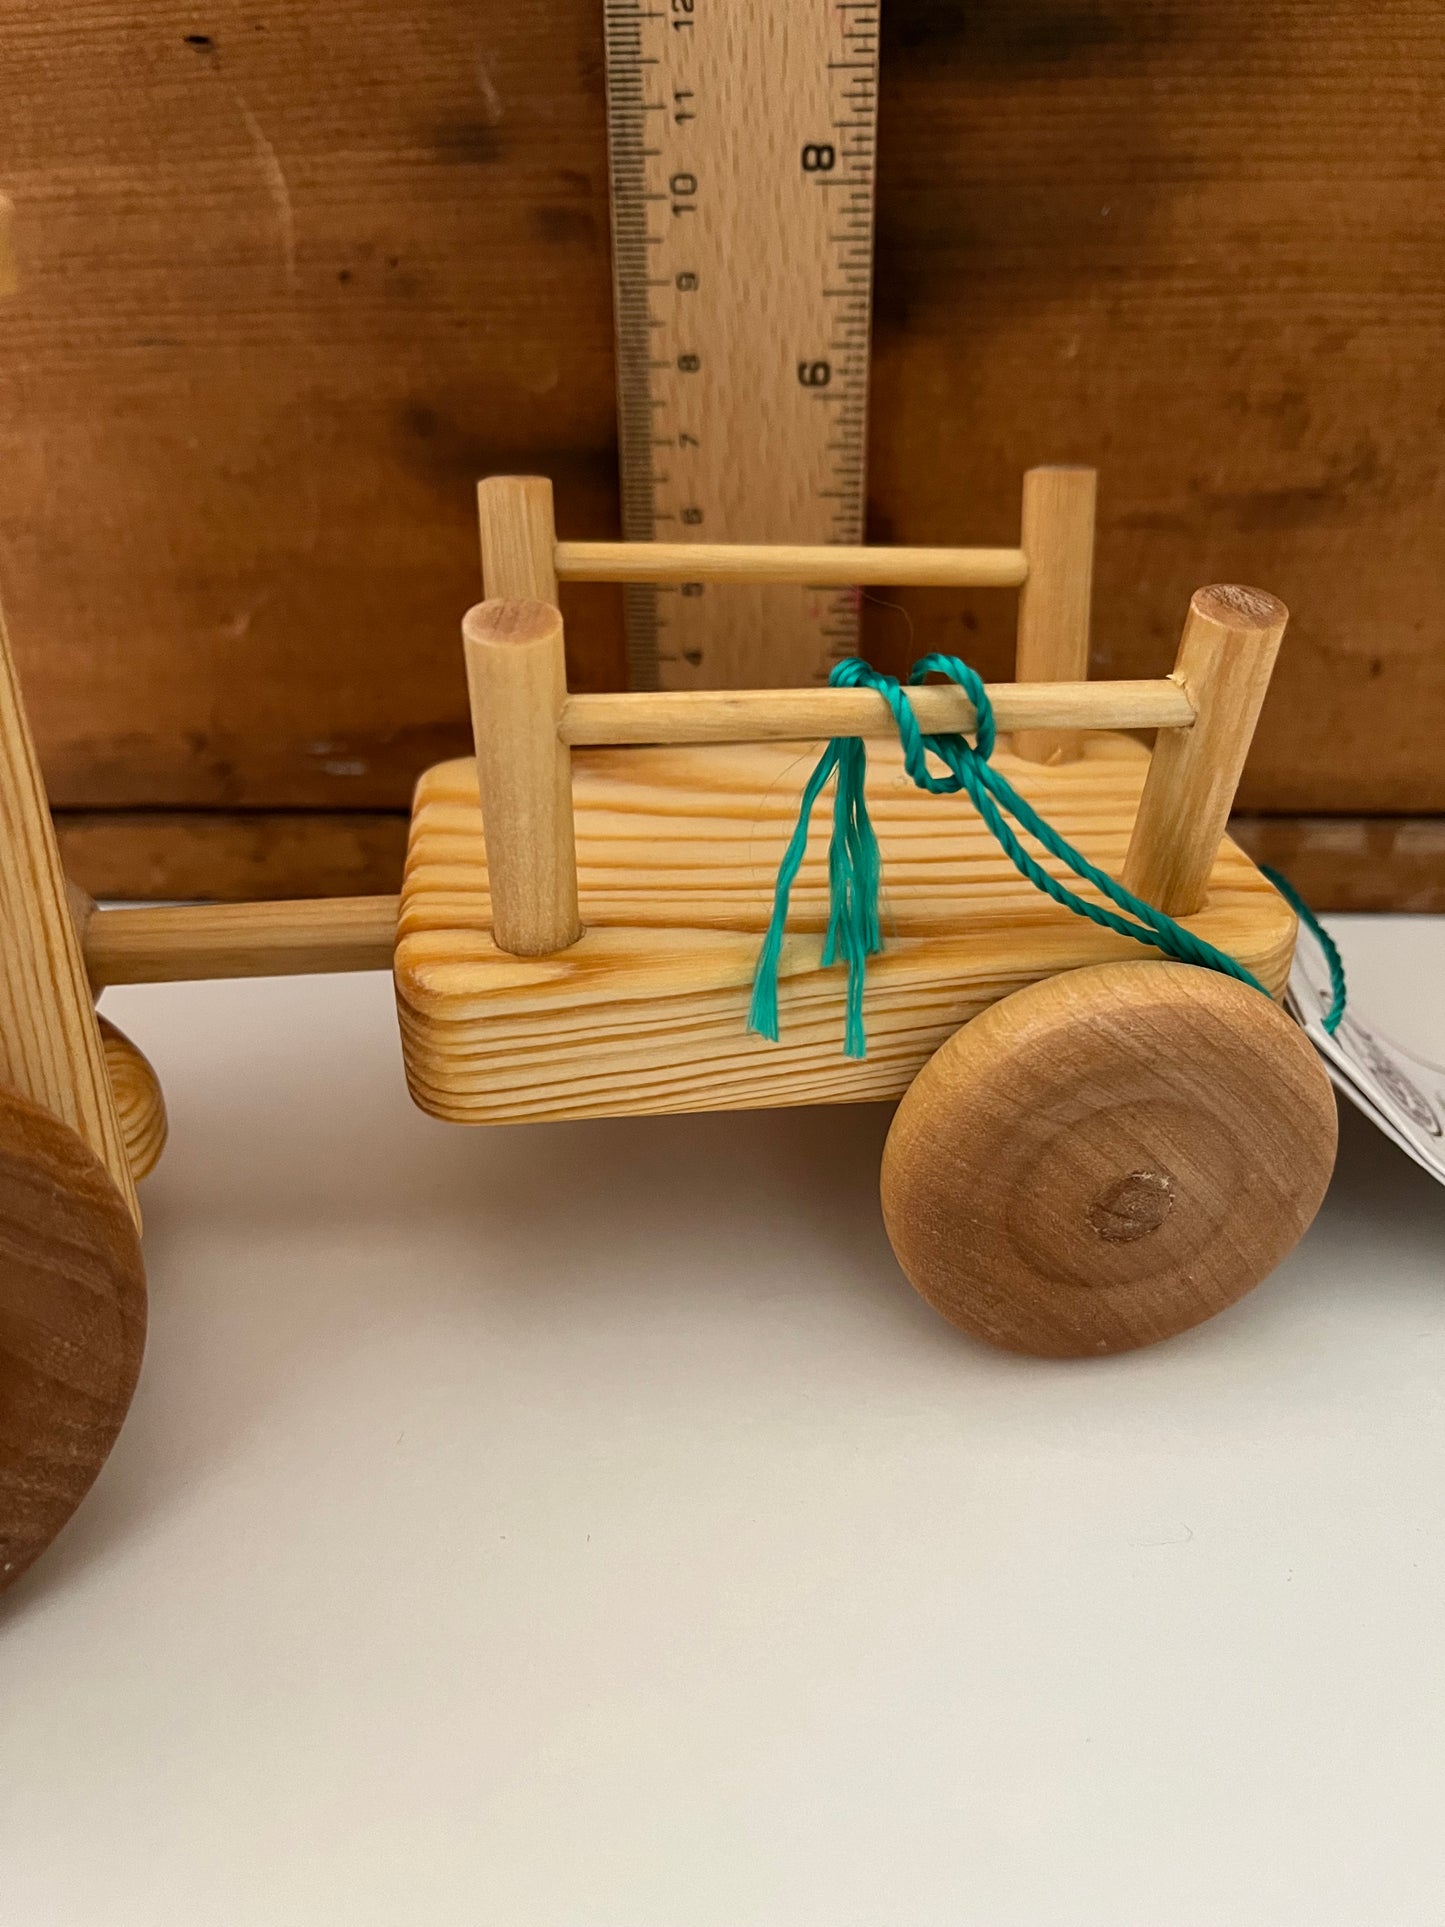 Wooden Toy - ON SALE! Debresk TRACTOR AND WAGON